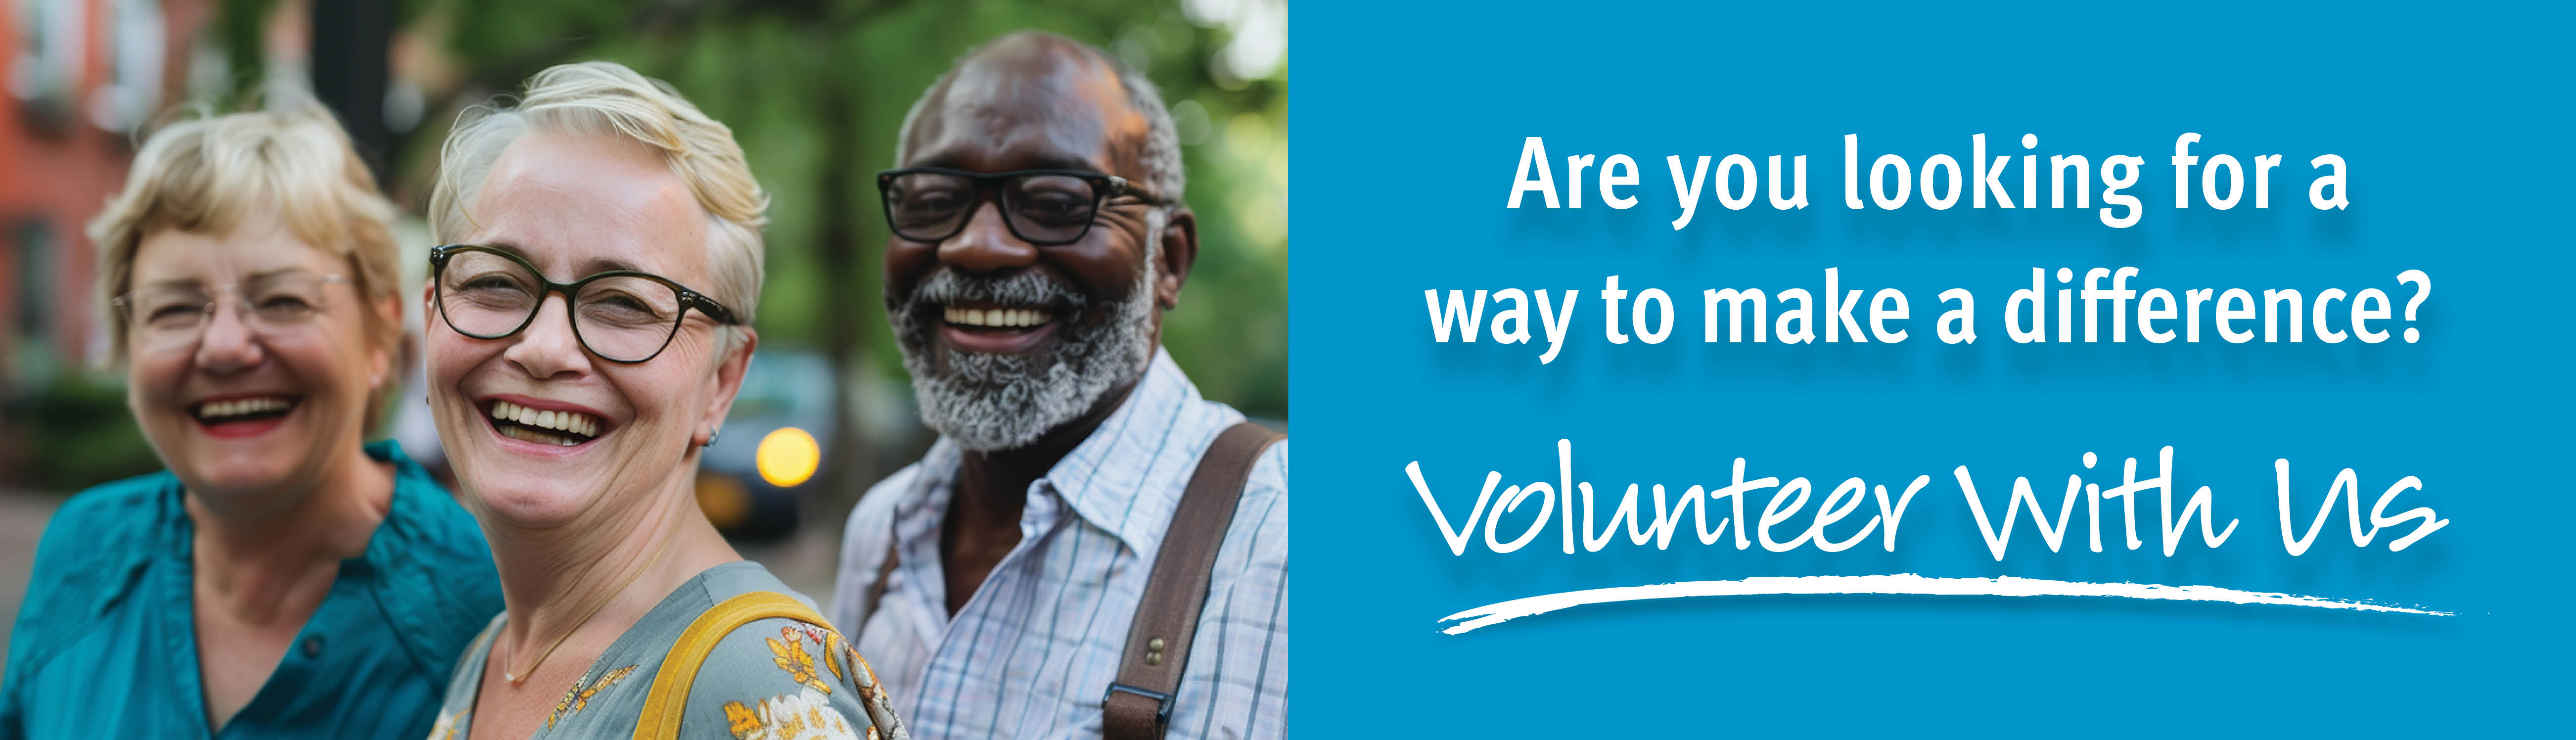 Are you looking for a way to make a difference? Volunteer with us!